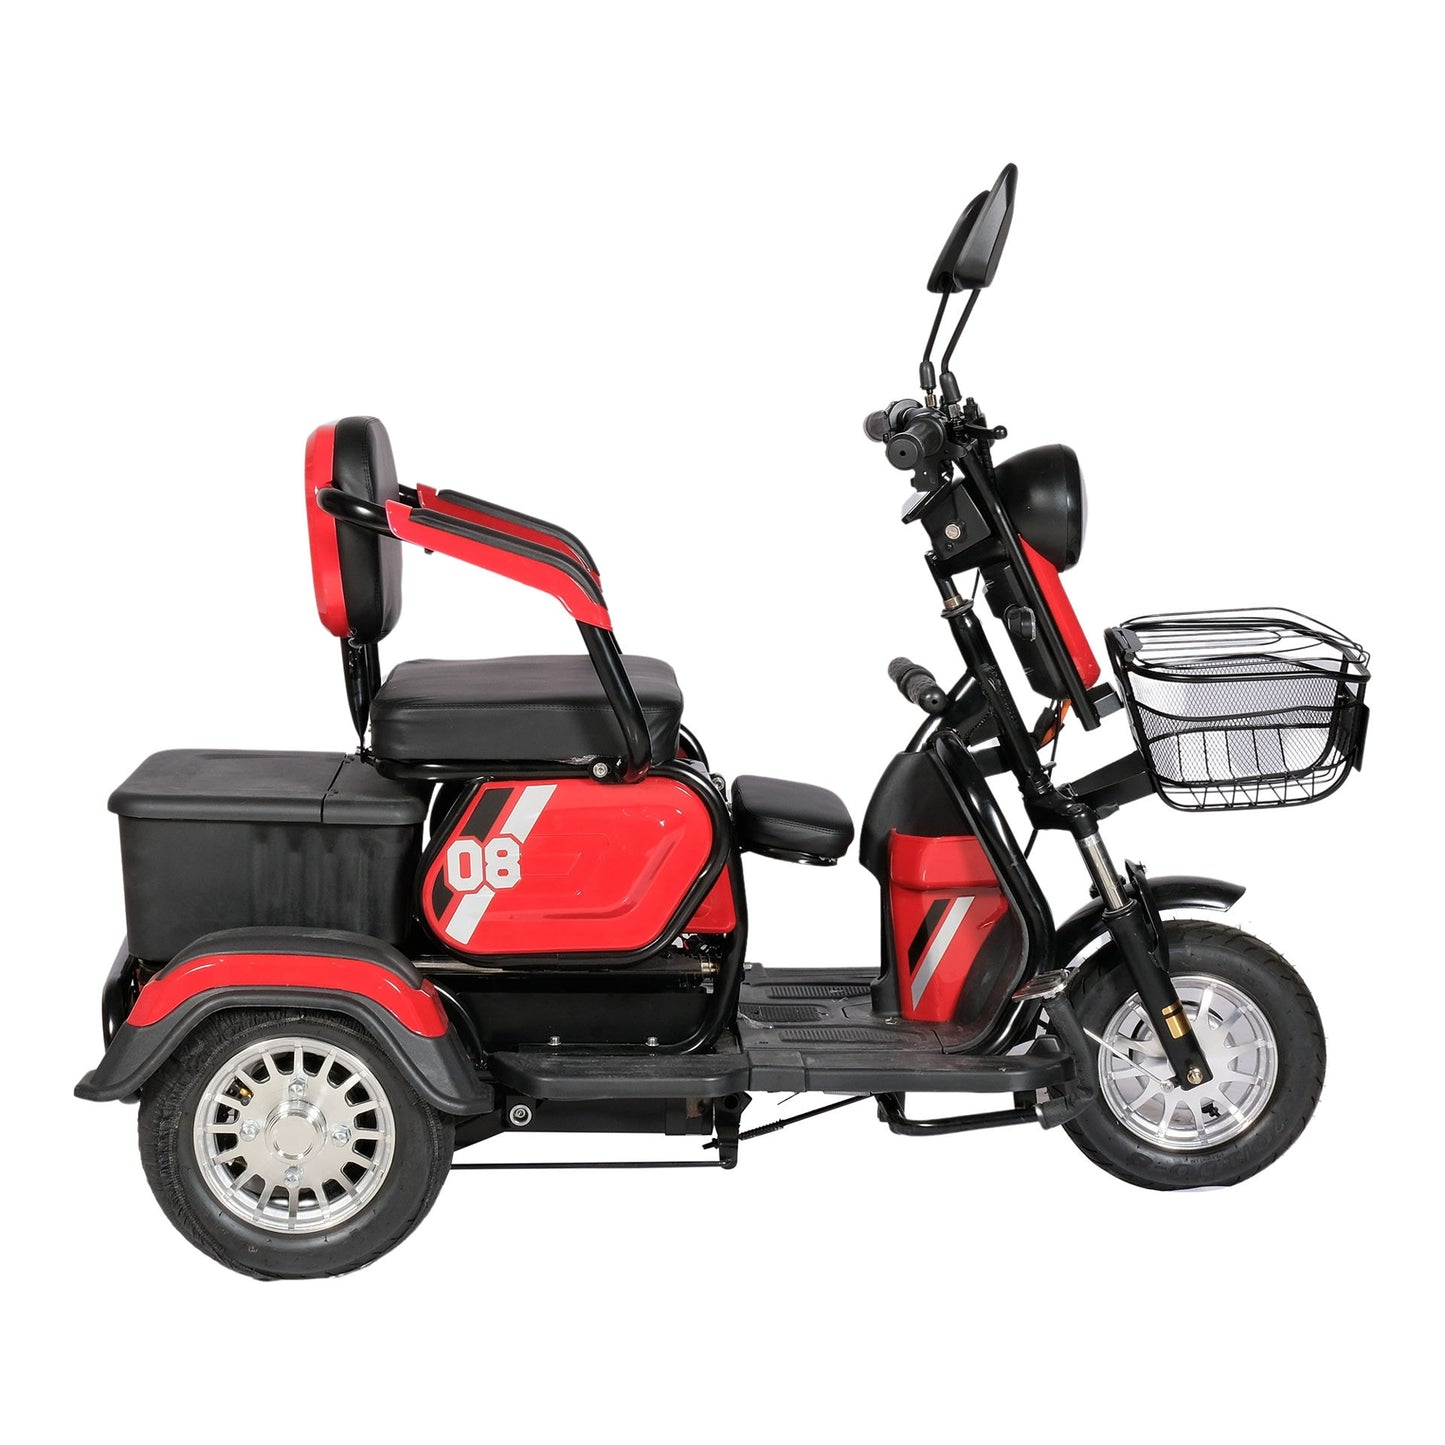 Chenxn 3 Wheel Electric Scooter Bike With Storage, 600W, Red - COOLBABY